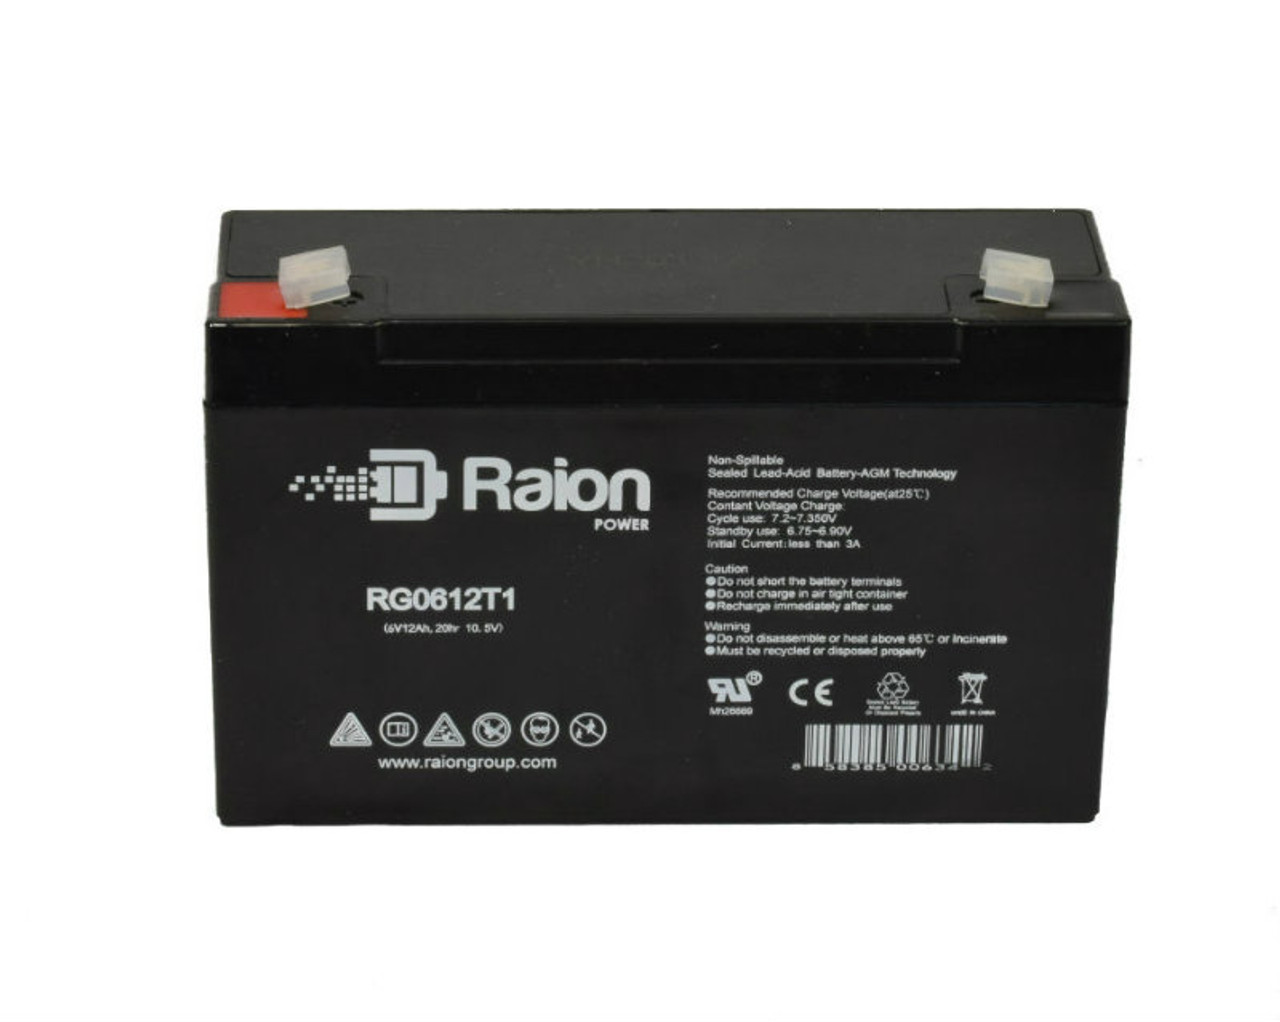 Raion Power RG06120T1 Replacement Battery Cartridge for Safe 425A